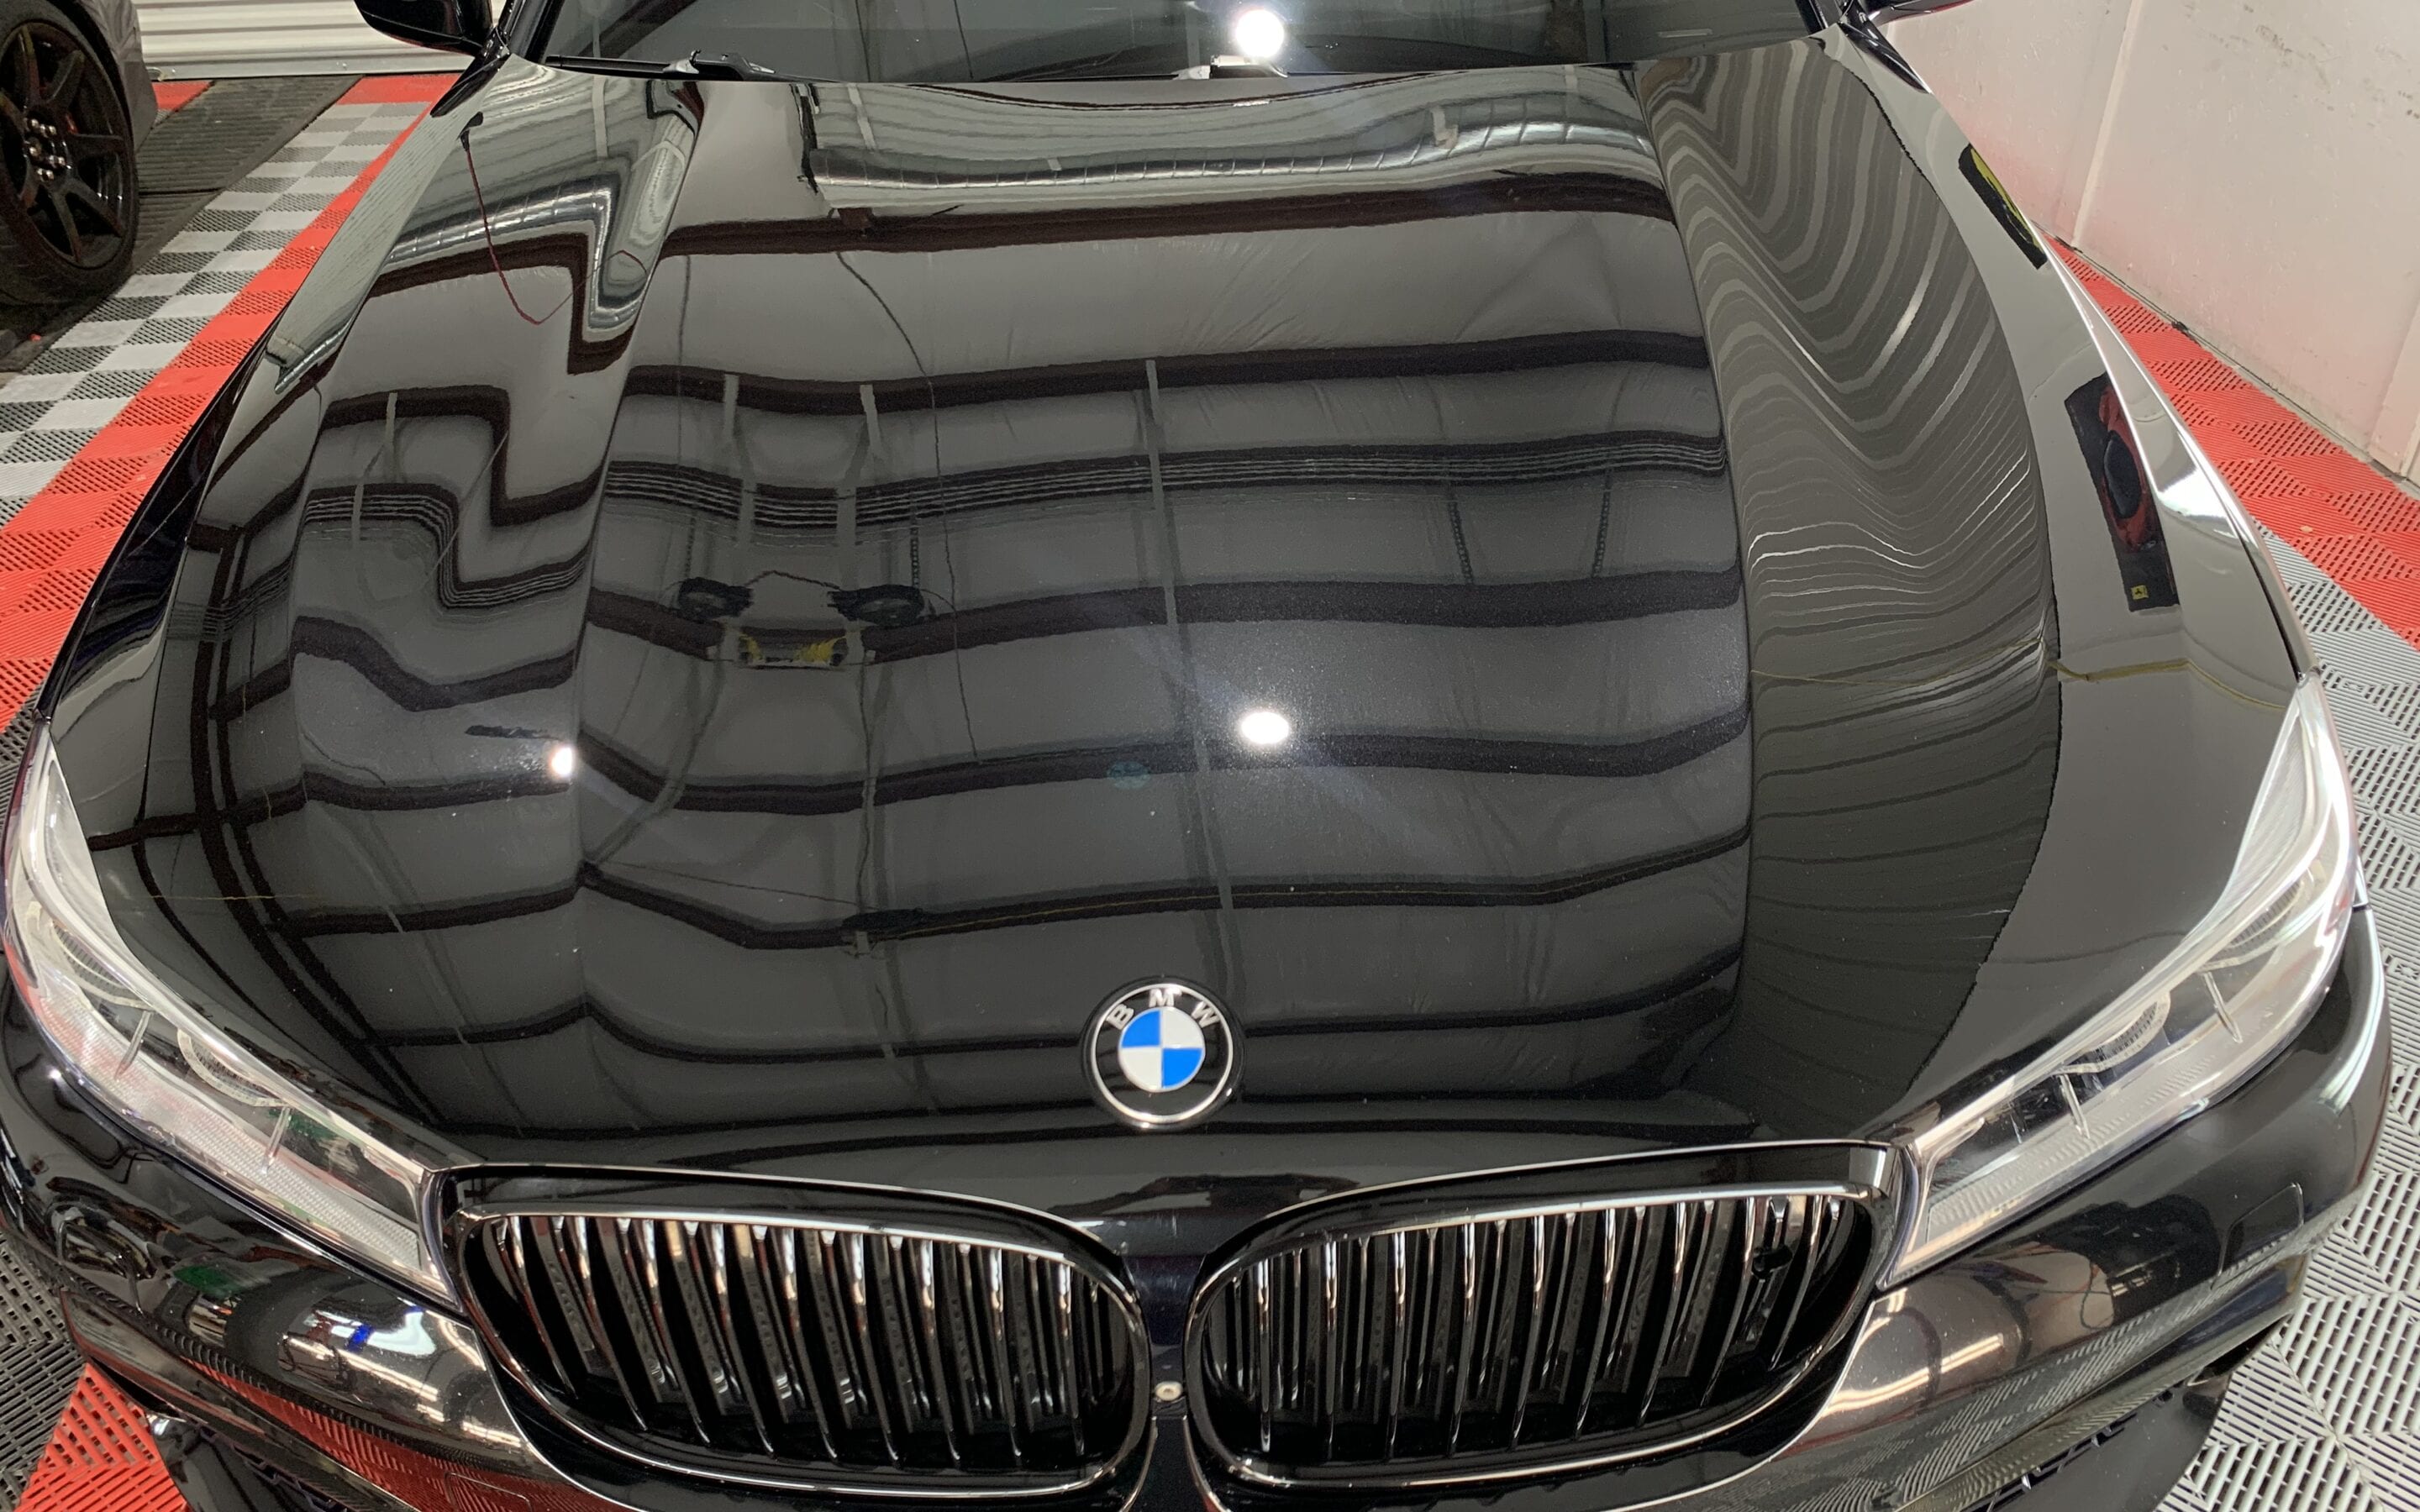 Photo of a Ceramic Coating of a 2016 BMW 7-Series